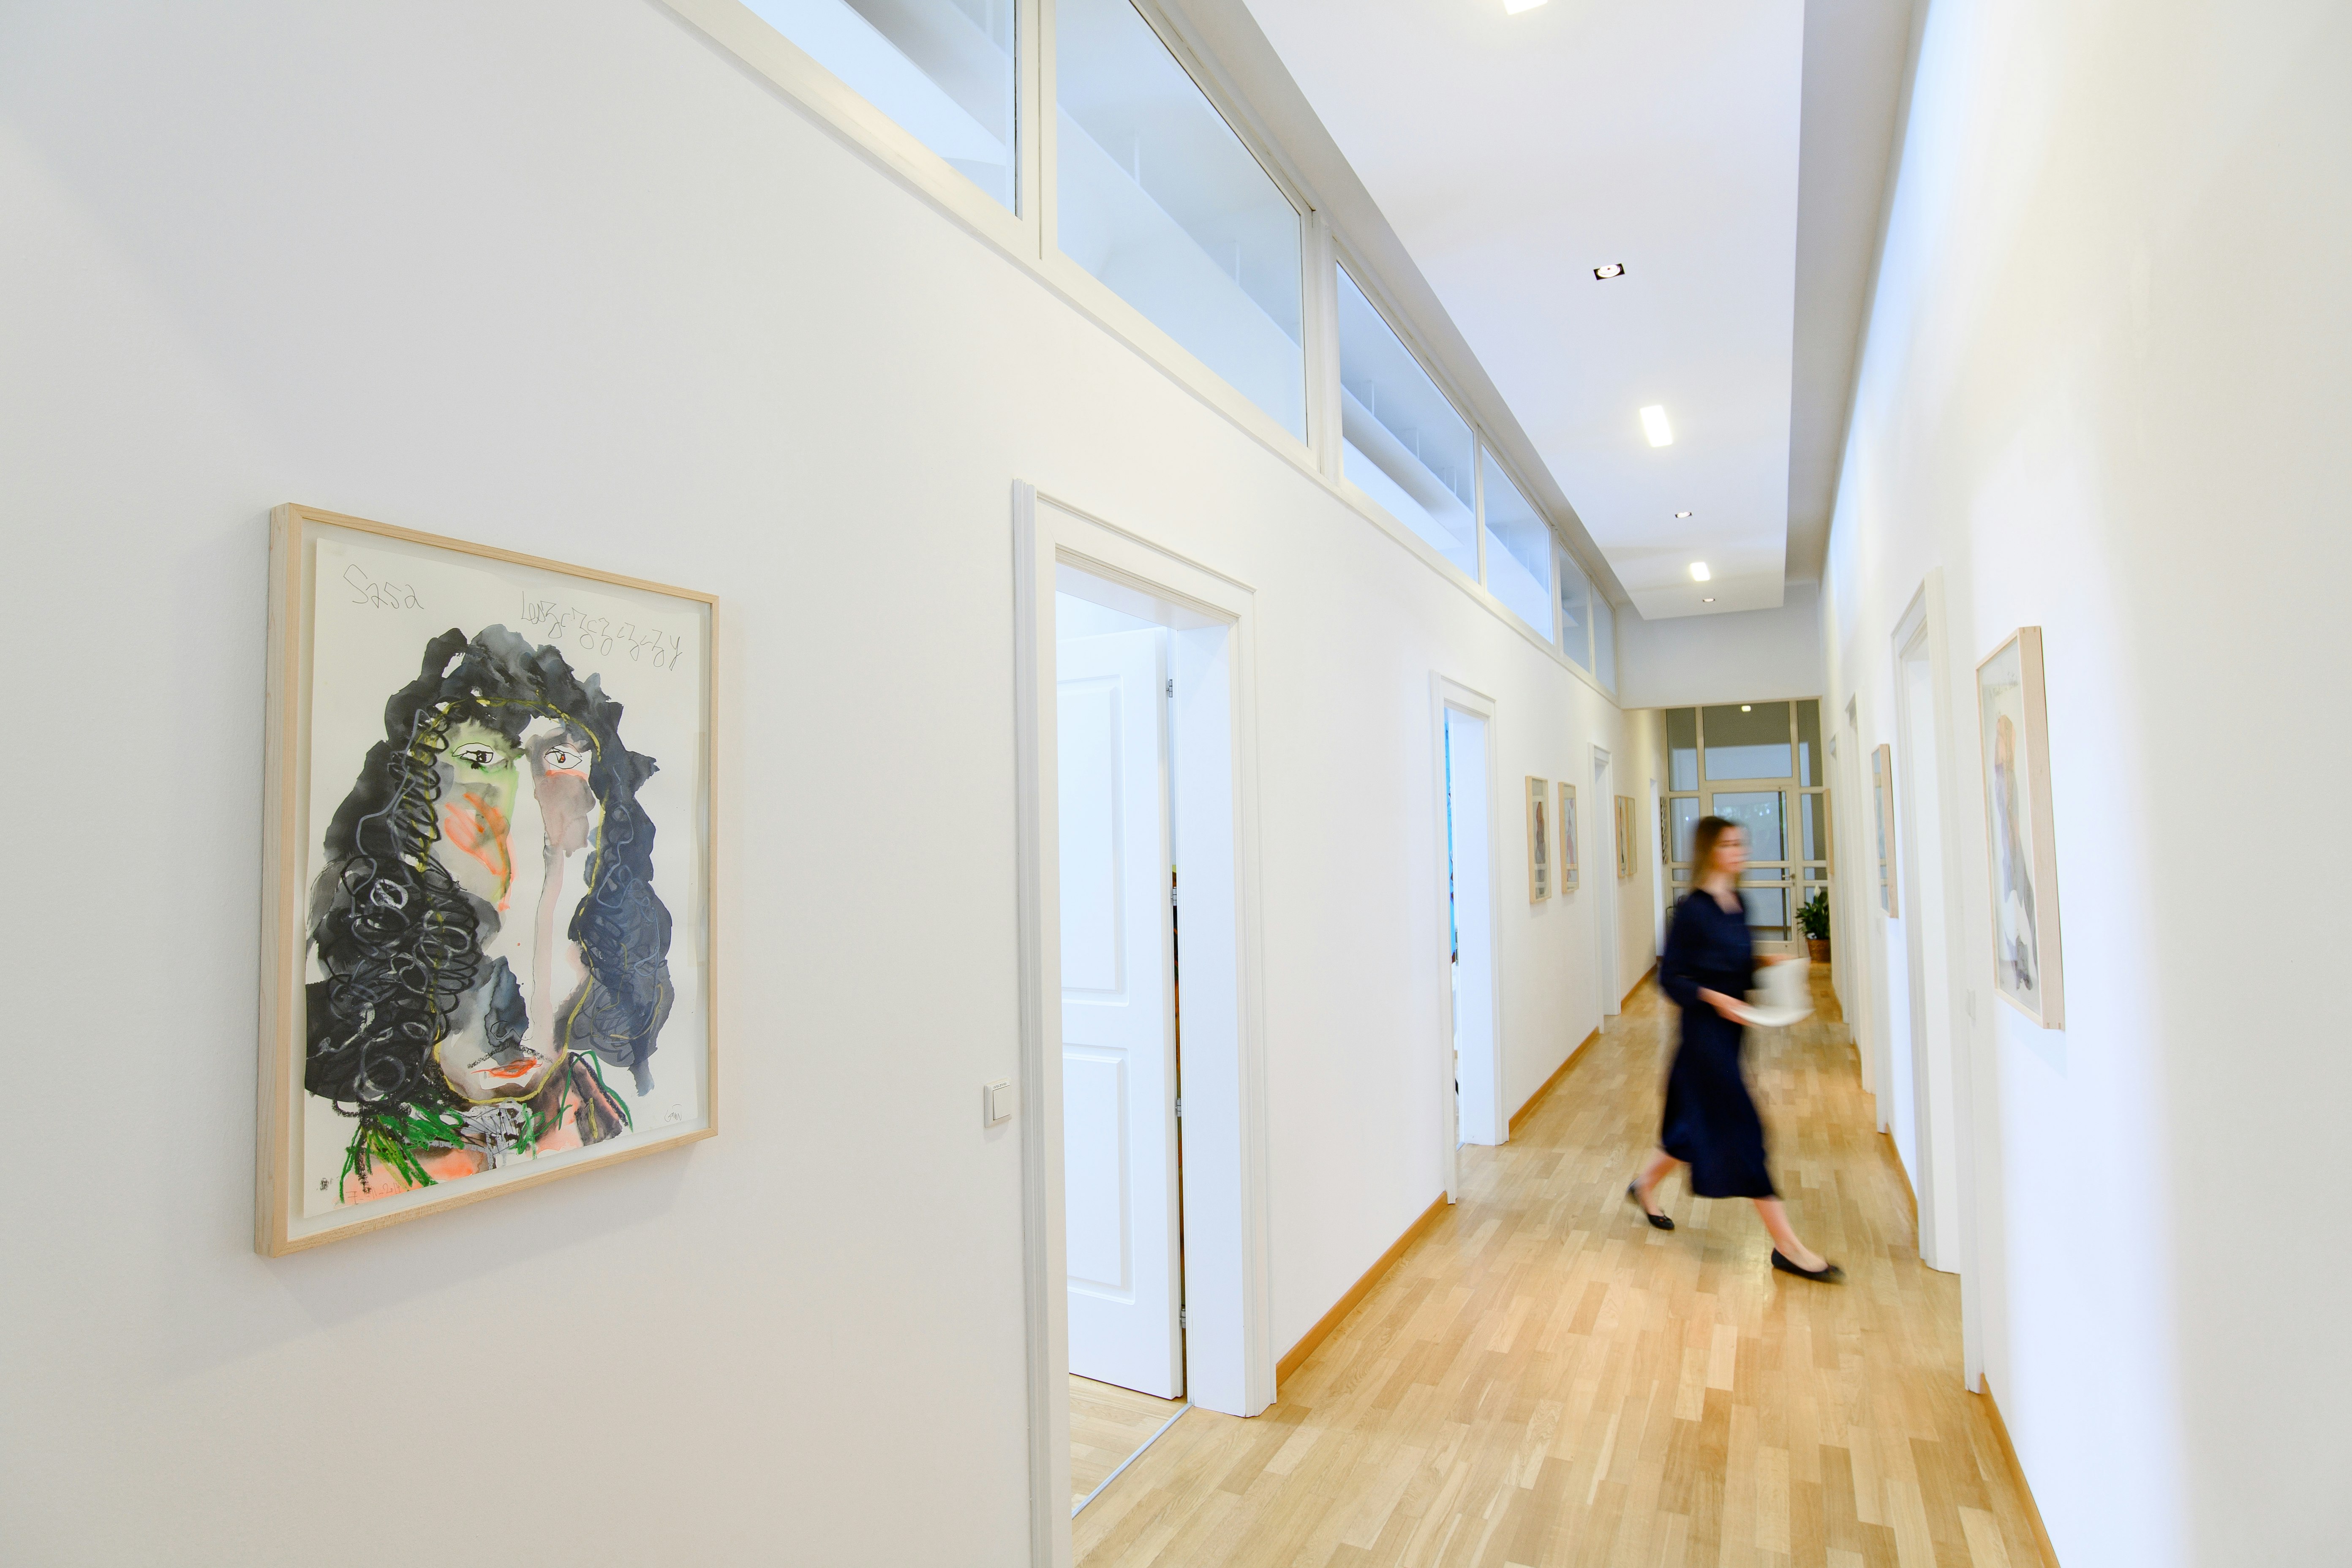 Corridor of the office in Munich, with an arts piece on the left wall and a woman crossing from room to room